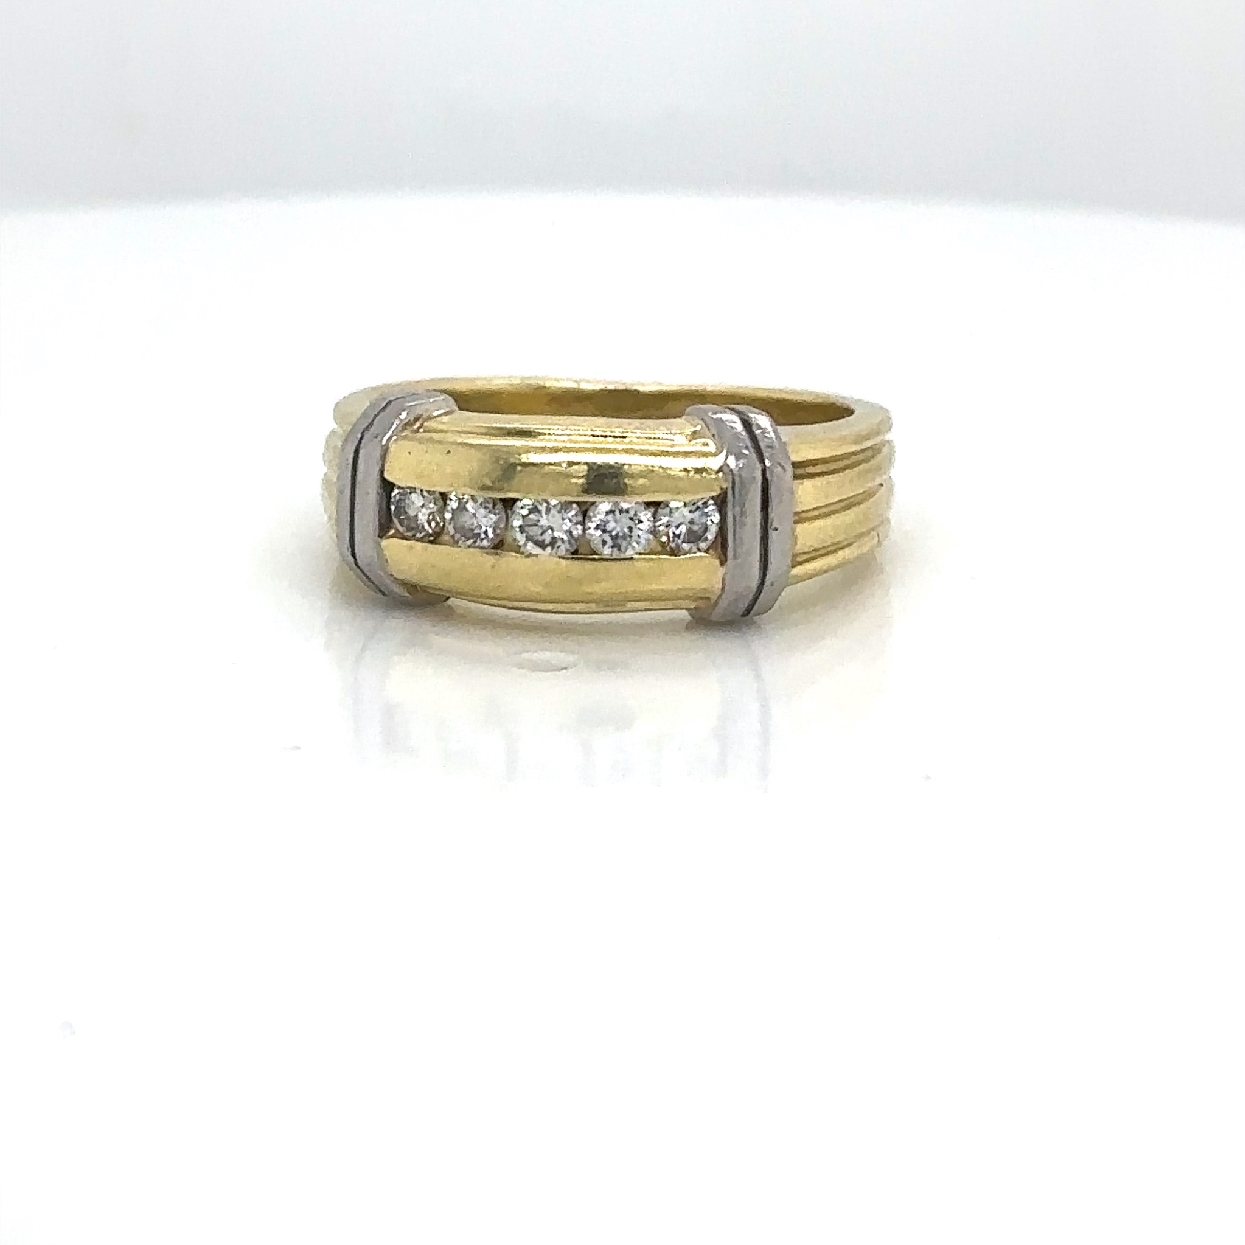 18K Yellow Gold Wedding Band with Platinum Accents
G/VS
.50ct

Size 7.25